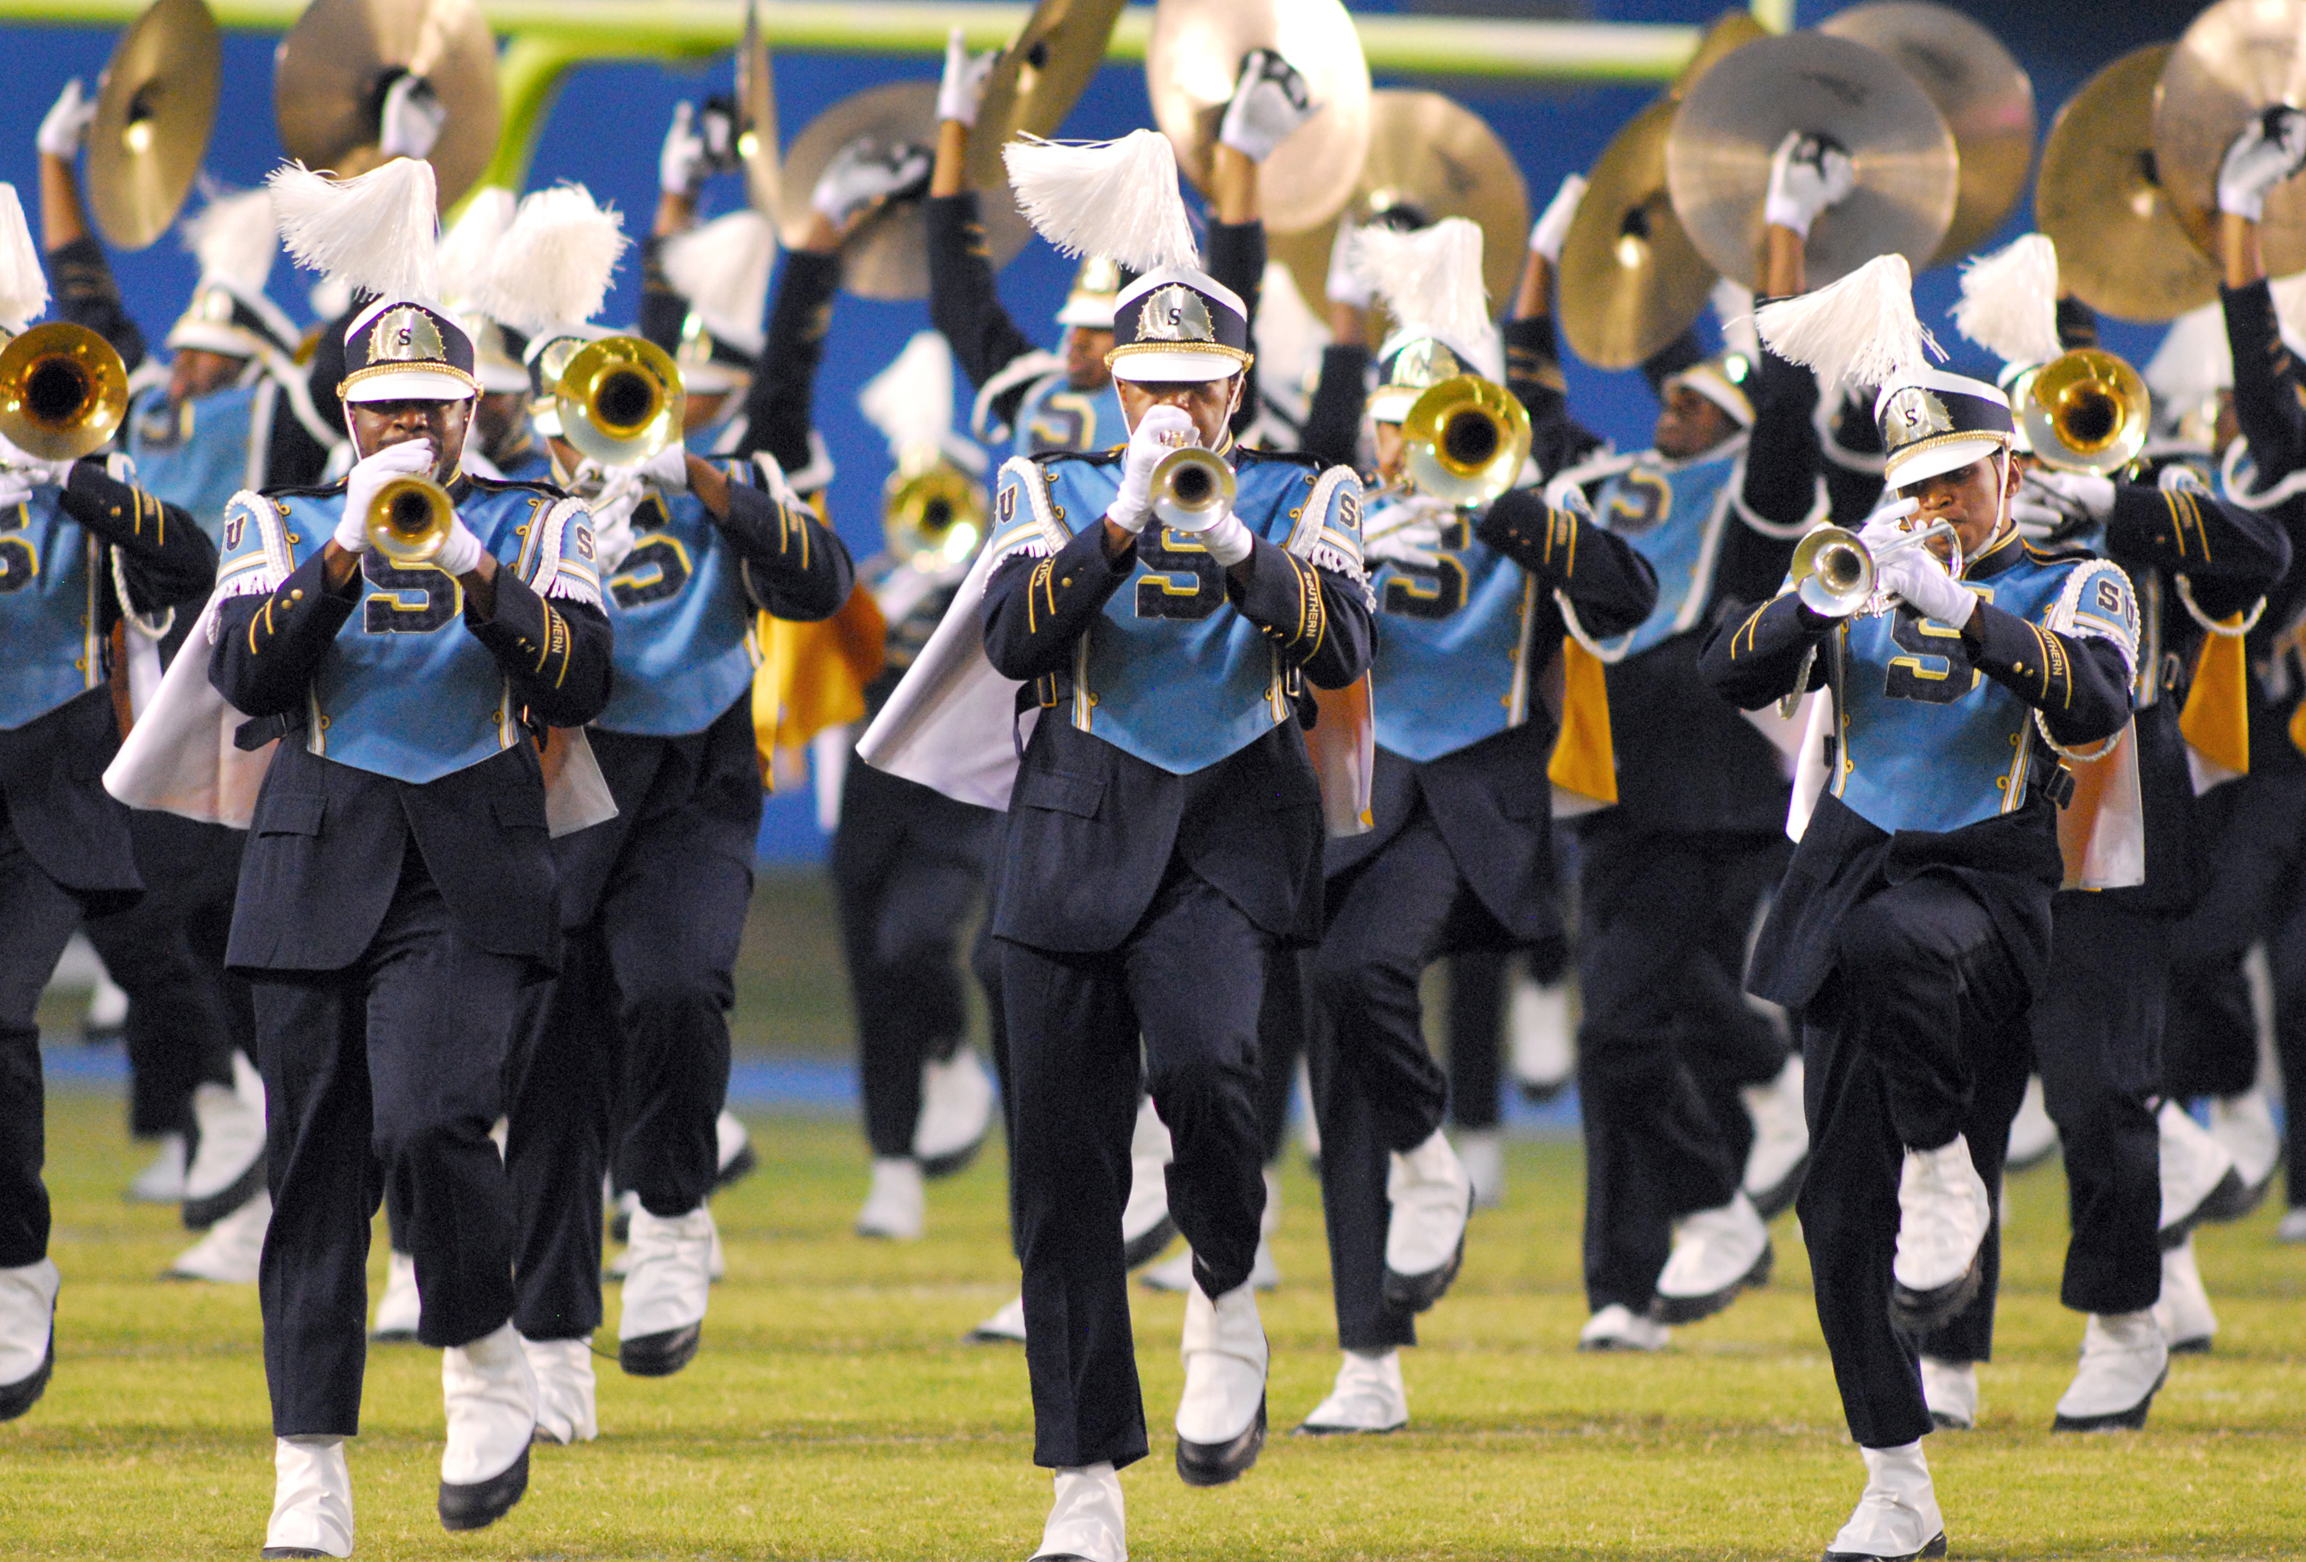 SU's "Human Jukebox" Marching Band will “March On” to the 13th Annual